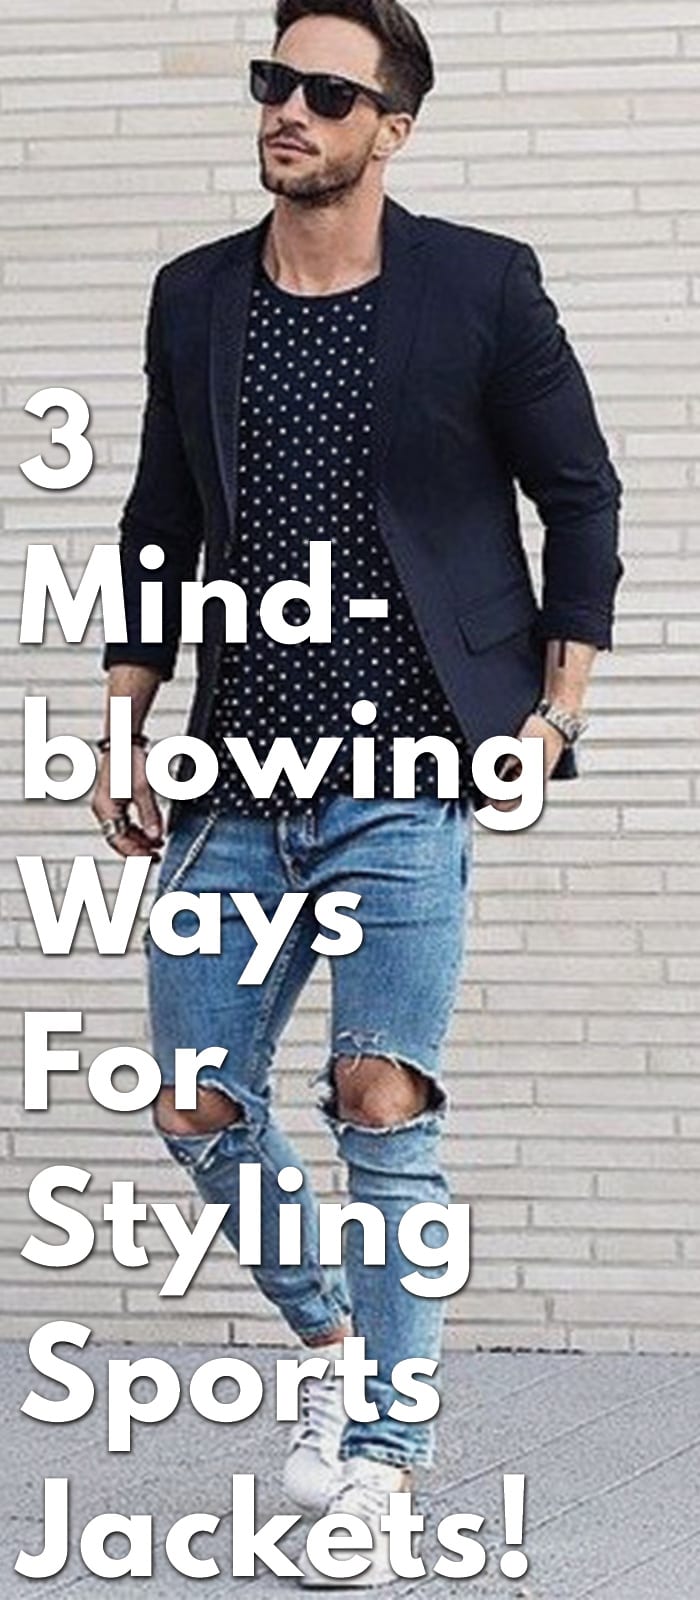 3-Mind-blowing-Ways-for-Styling-Sports-Jackets!